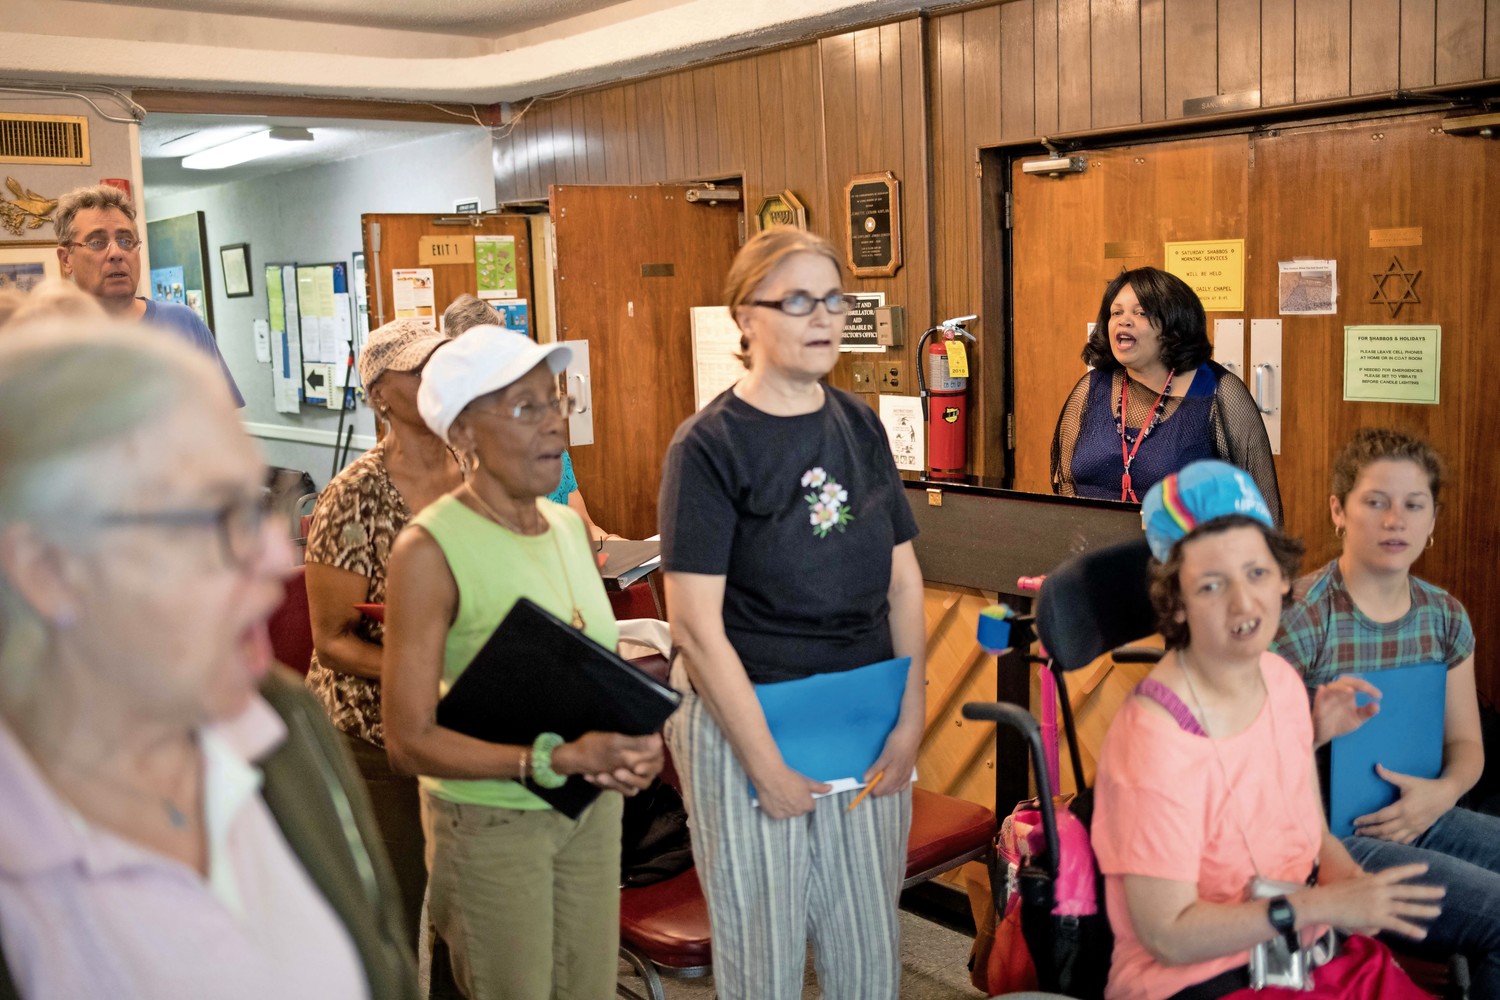 Cheryl Warfield leads singers through vocal exercises during a rehearsal at the JASA Van Cortlandt Senior Center. Warfield has been teaching senior citizens at the center how to sing for an upcoming performance on Independence Day.